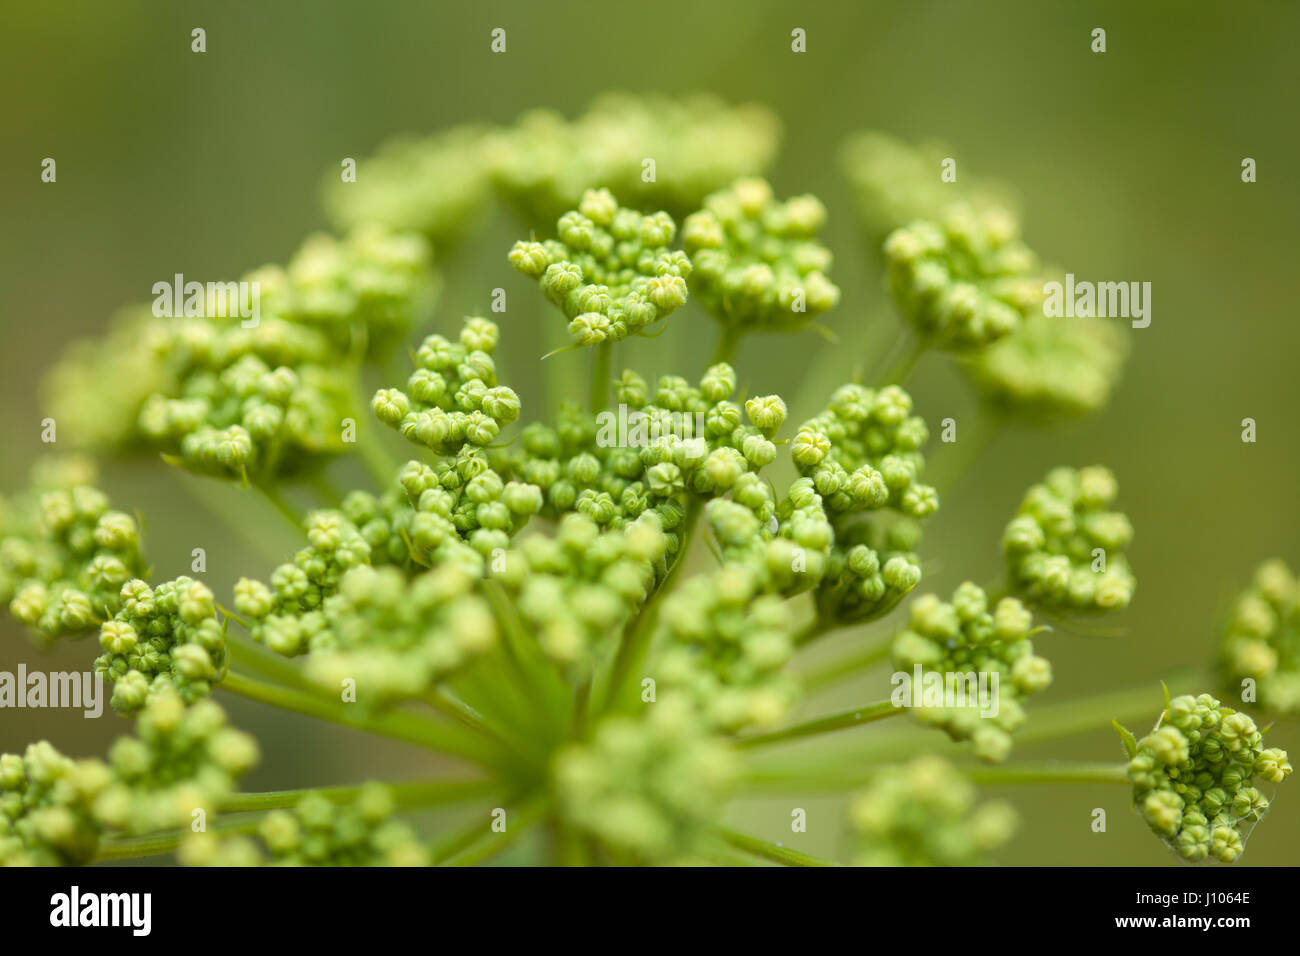 flora of Gra Canaria - buds of Todaroa montana, plant in celery, carrot or parsley family Stock Photo